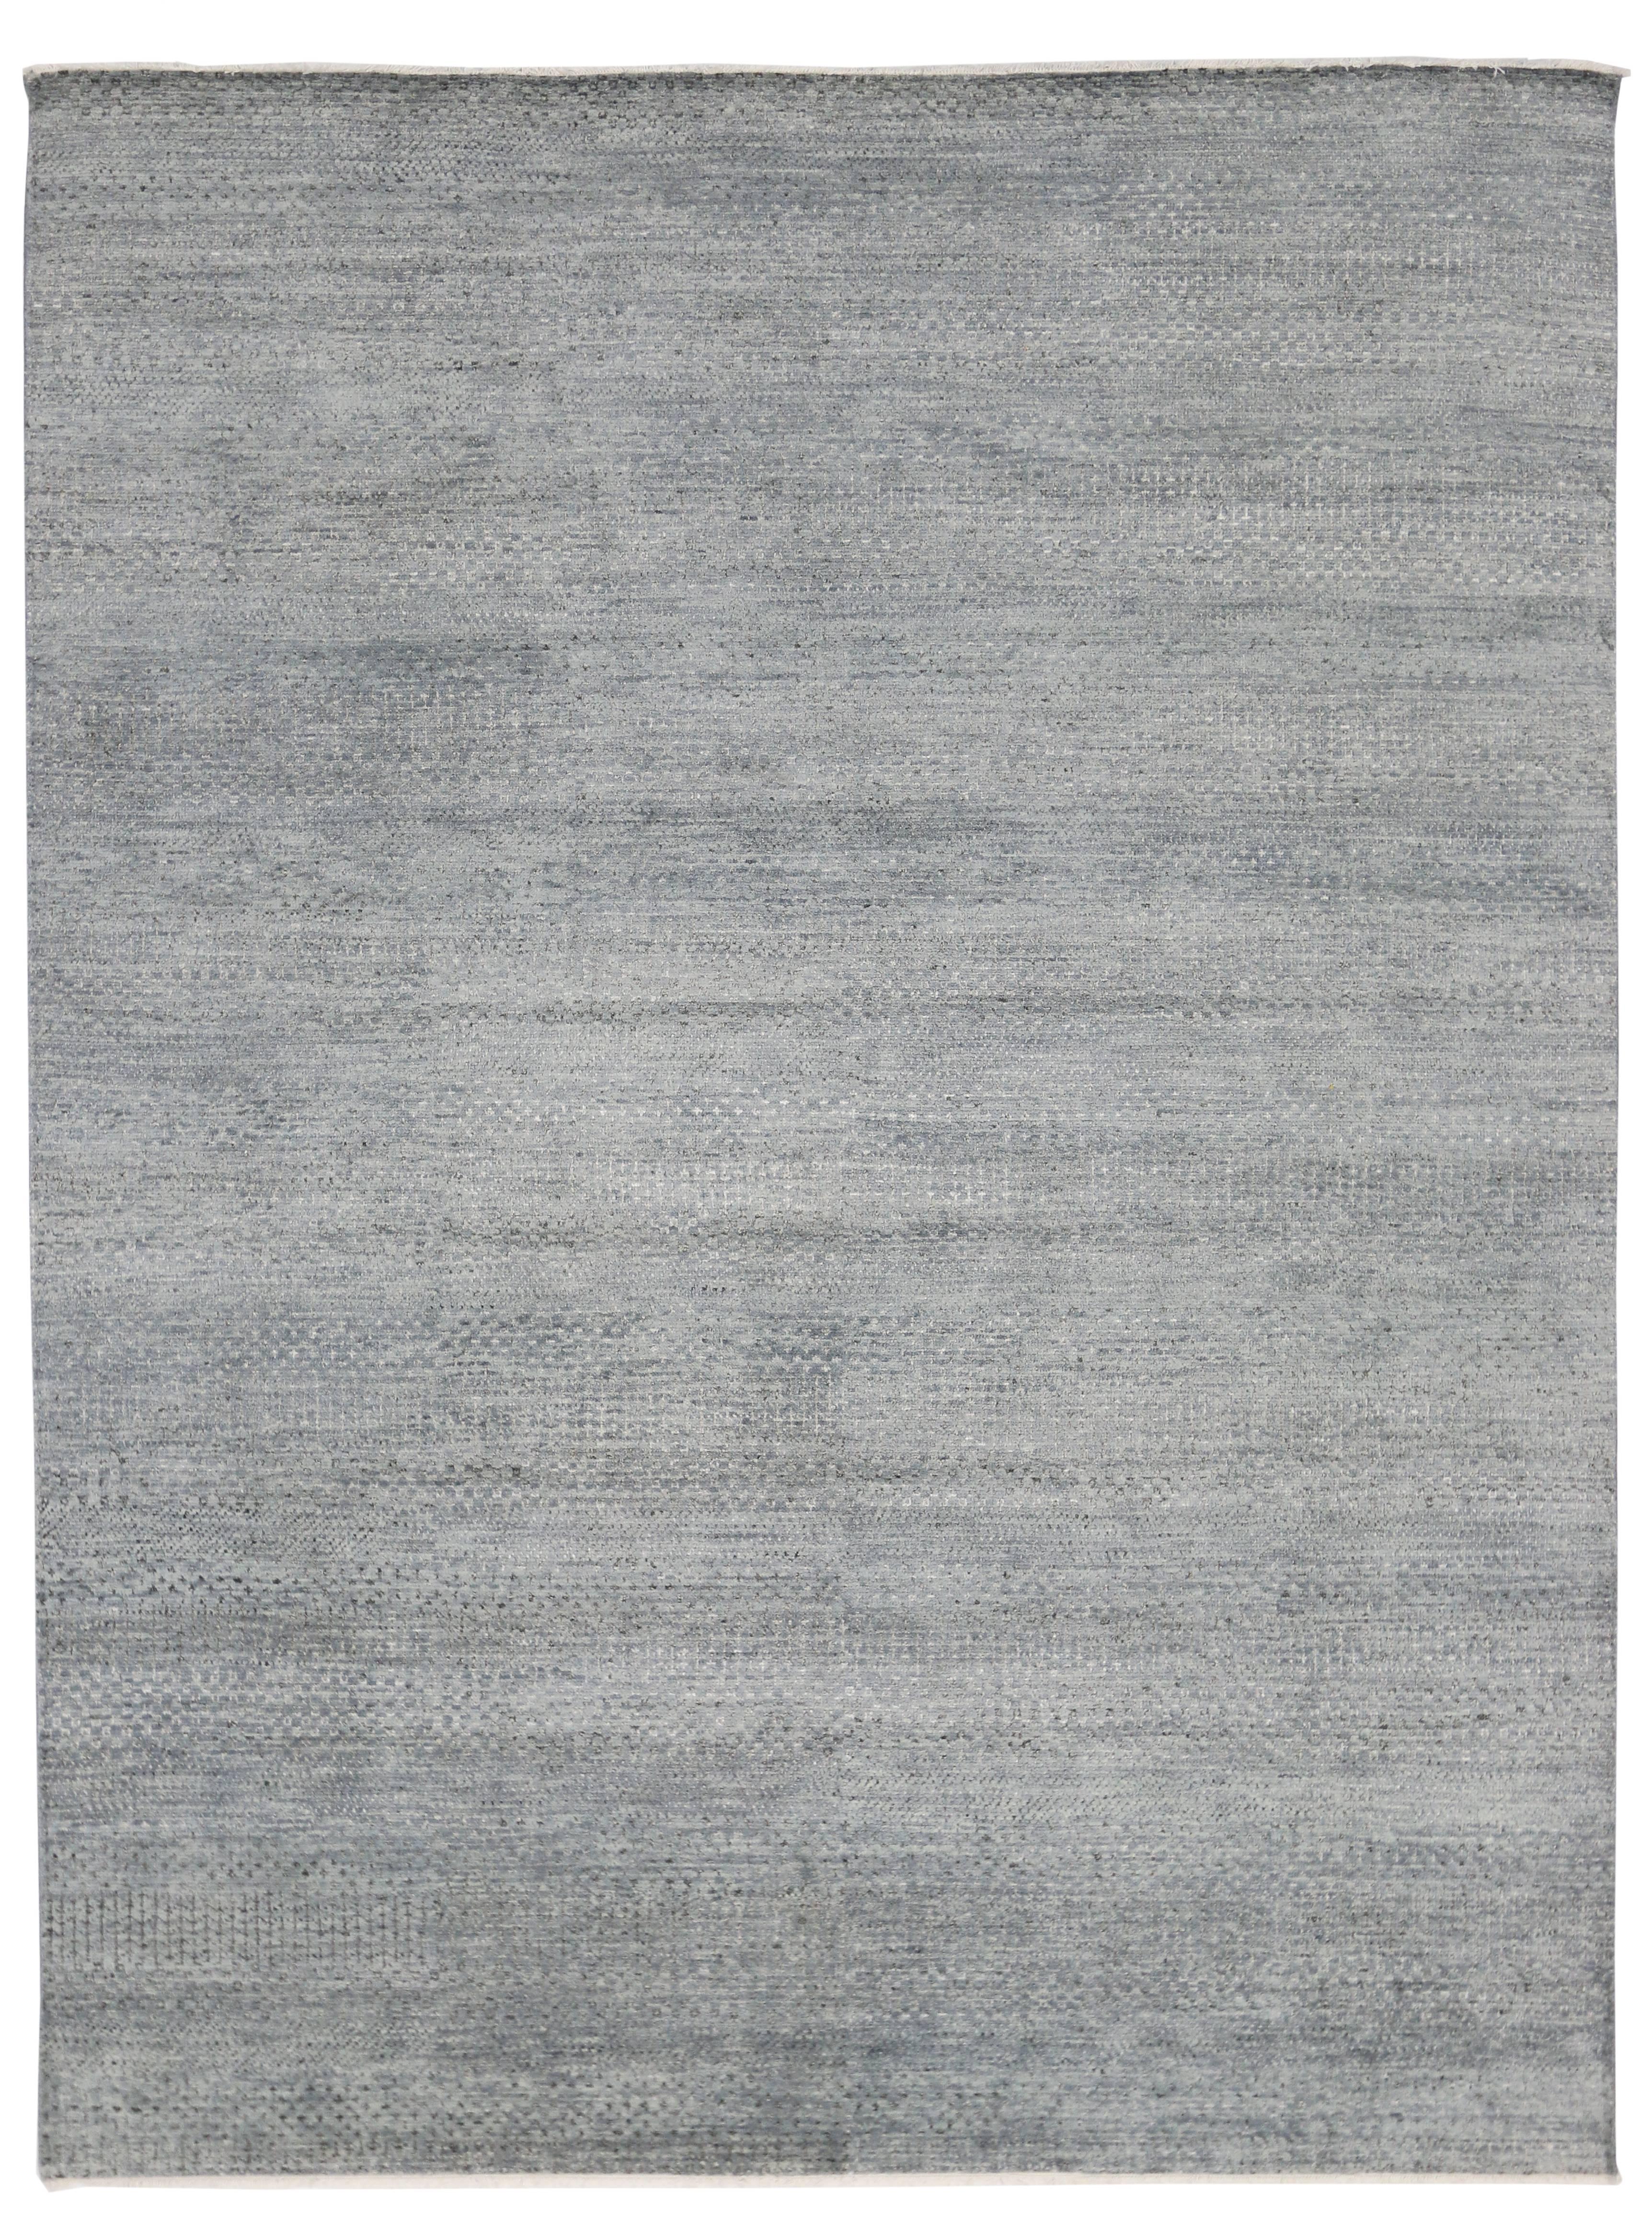 Wool Transitional Grass Cloth Patterned Slate Blue Area Rug with Modern Style